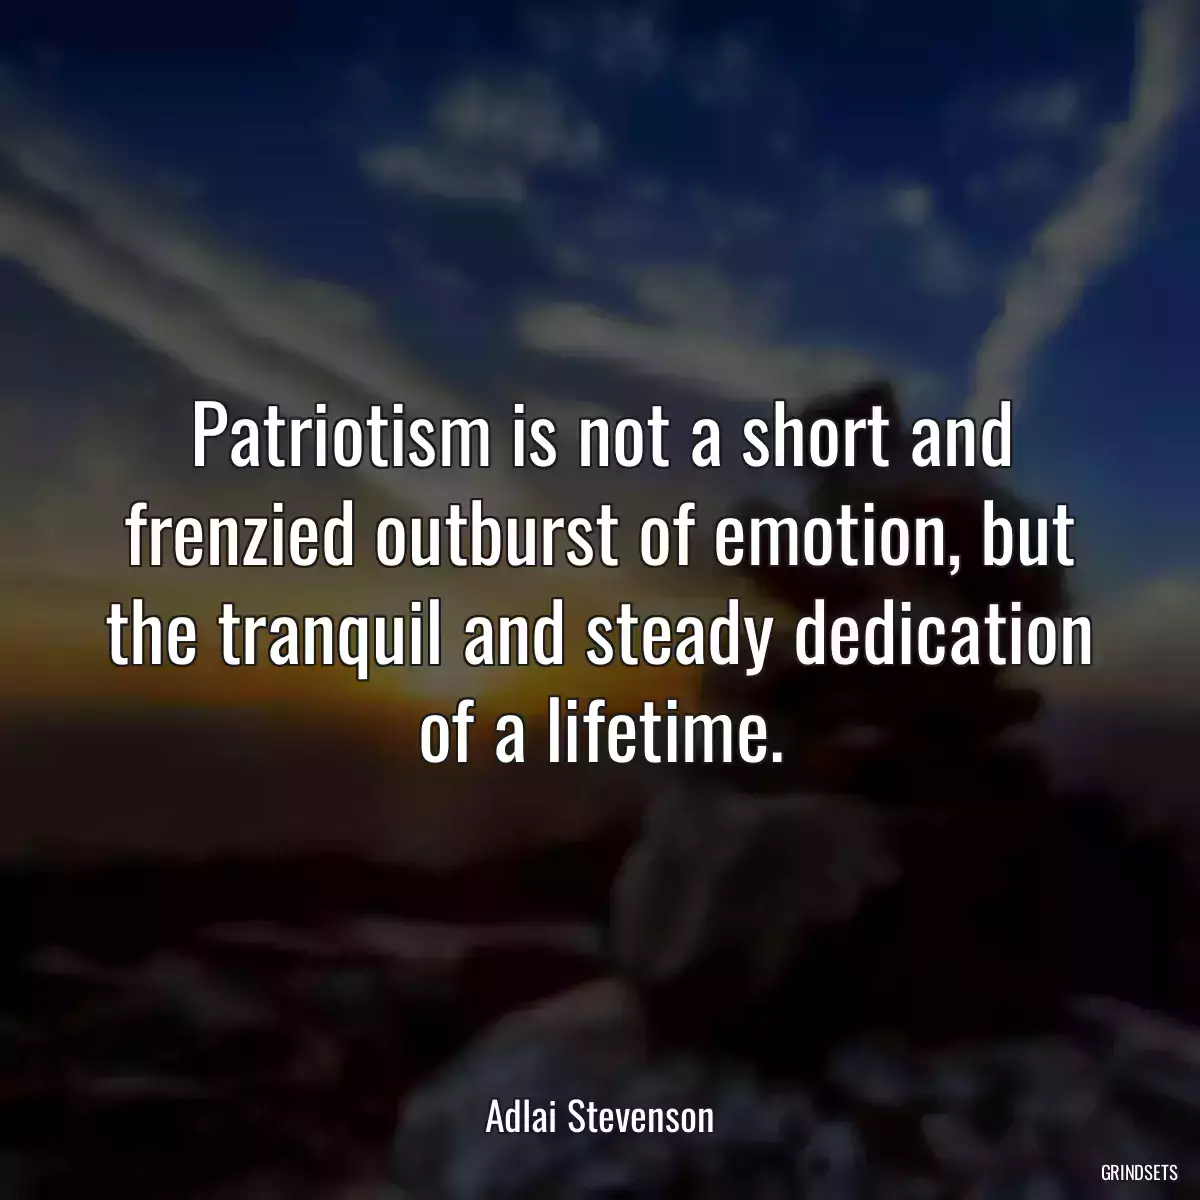 Patriotism is not a short and frenzied outburst of emotion, but the tranquil and steady dedication of a lifetime.